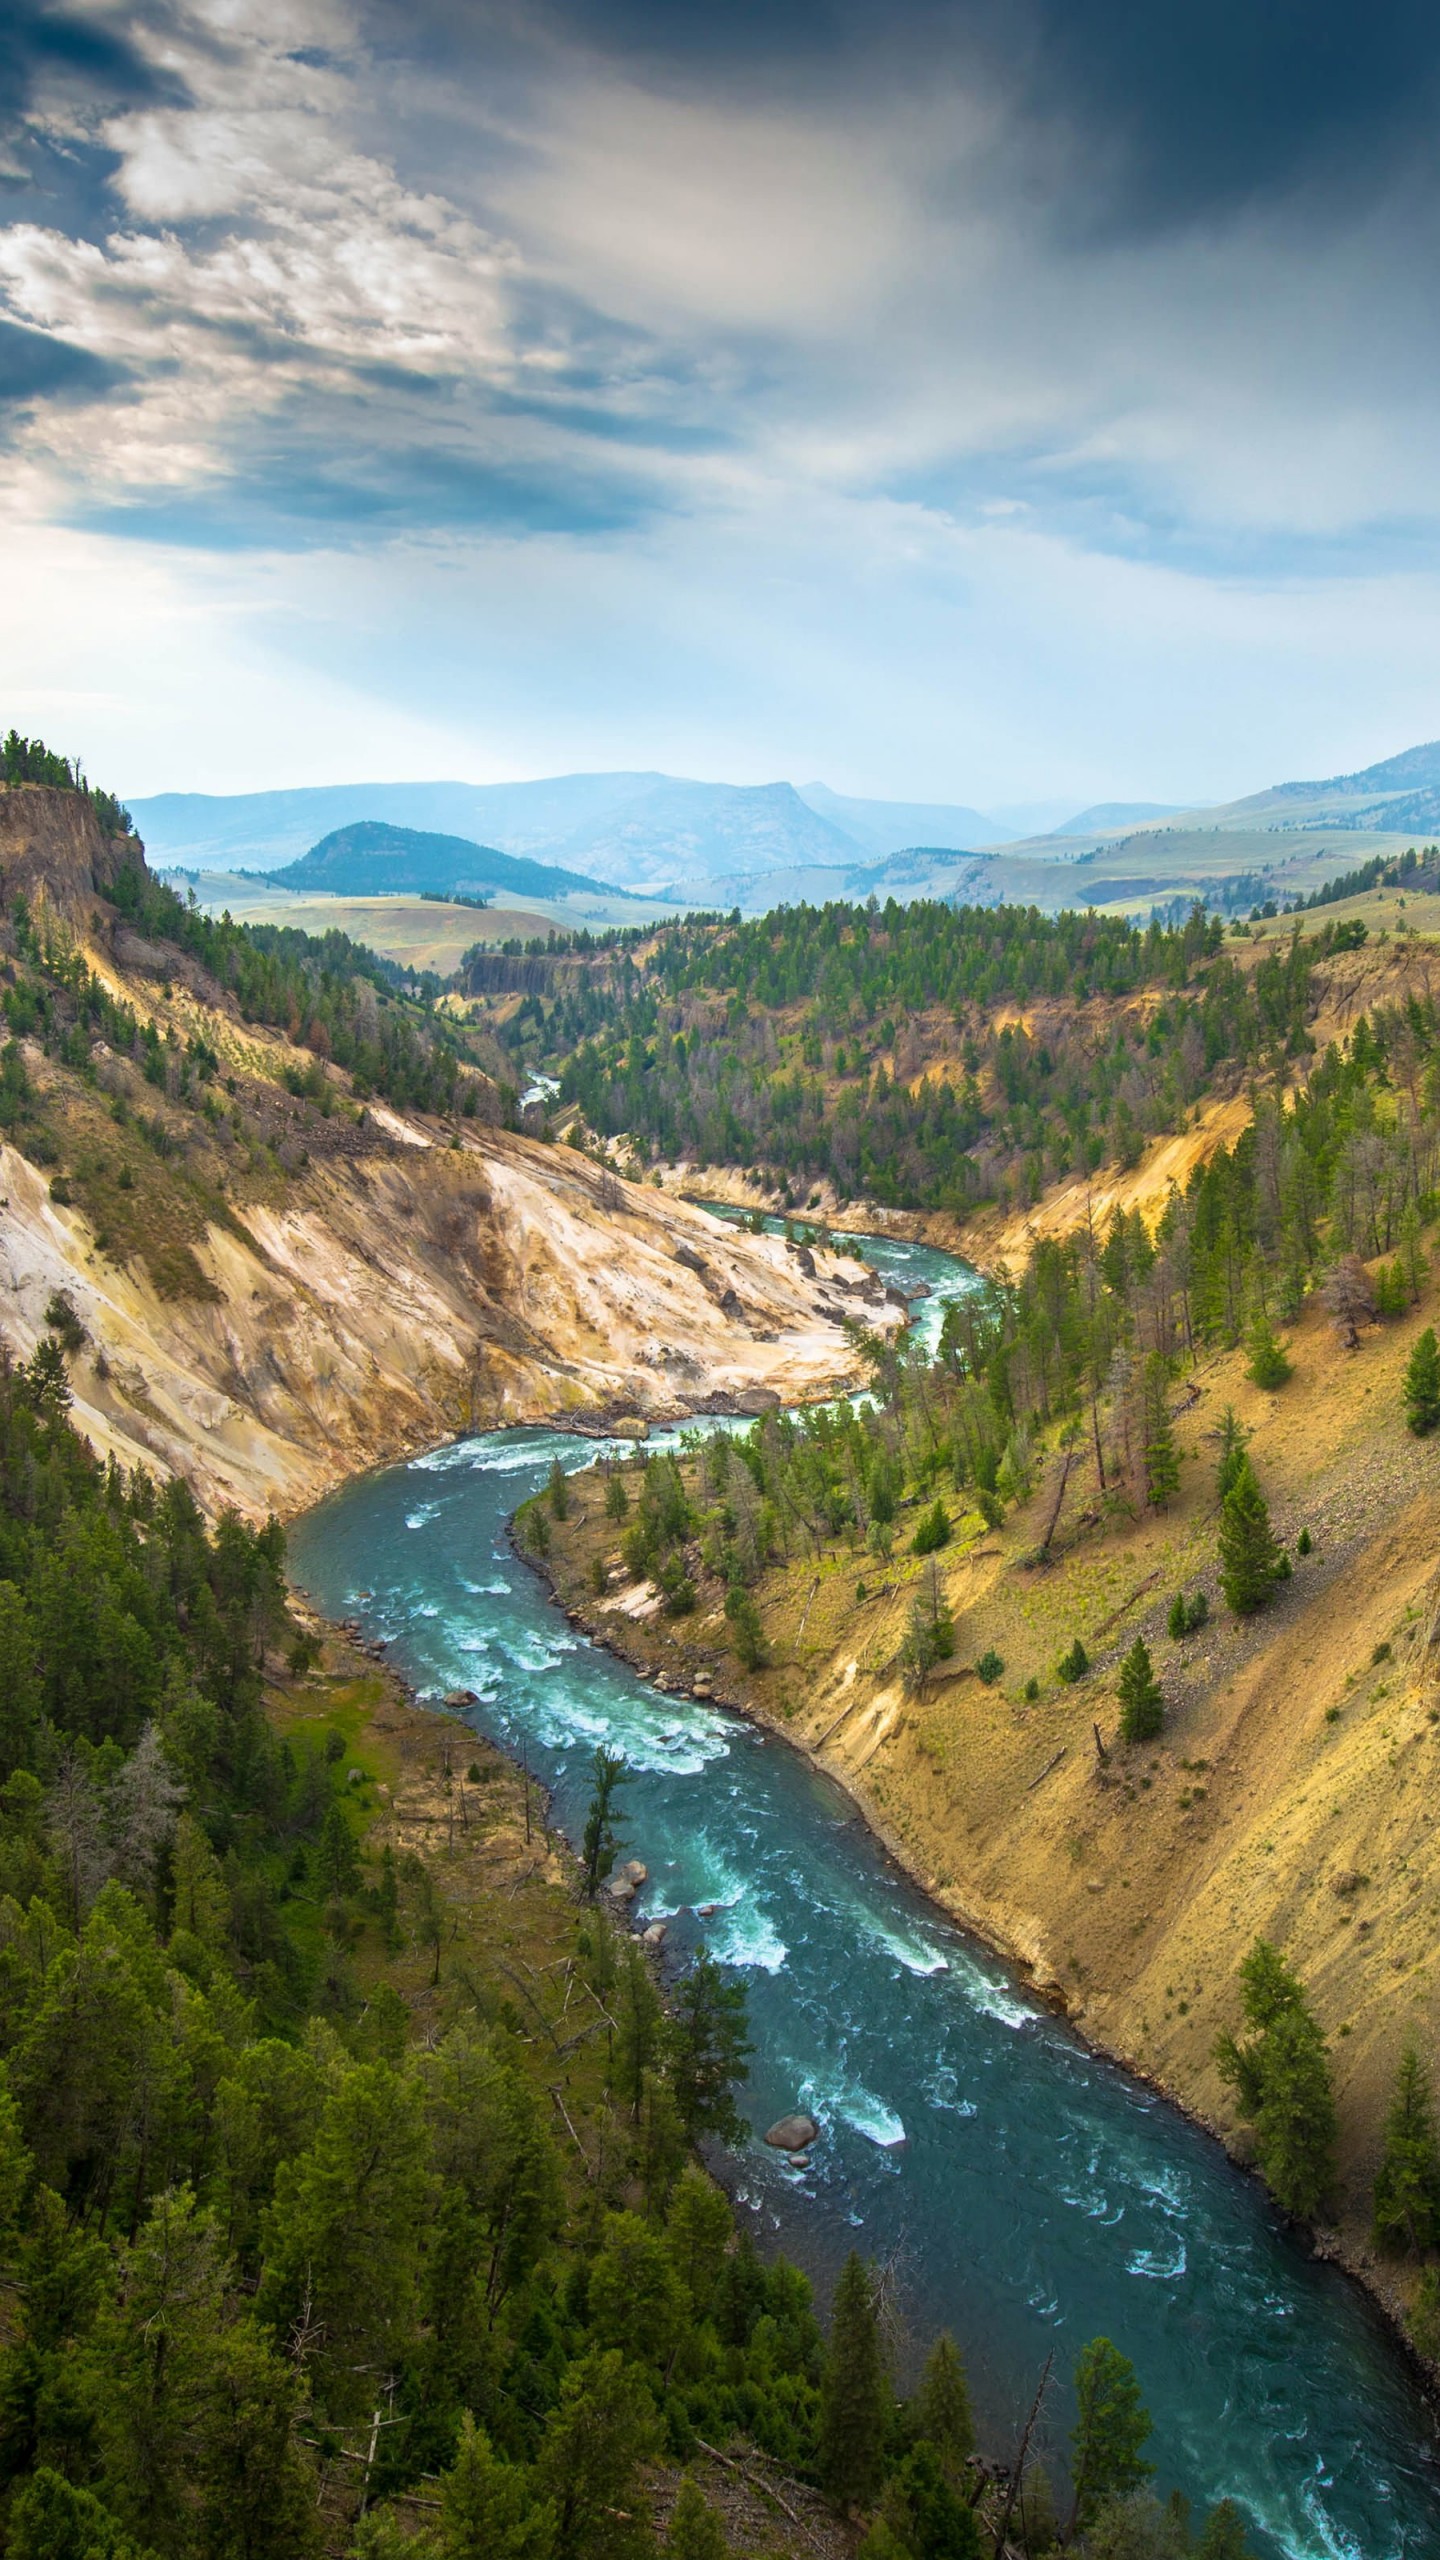 The River, Grand Canyon of Yellowstone National Park, USA Wallpaper for LG G3